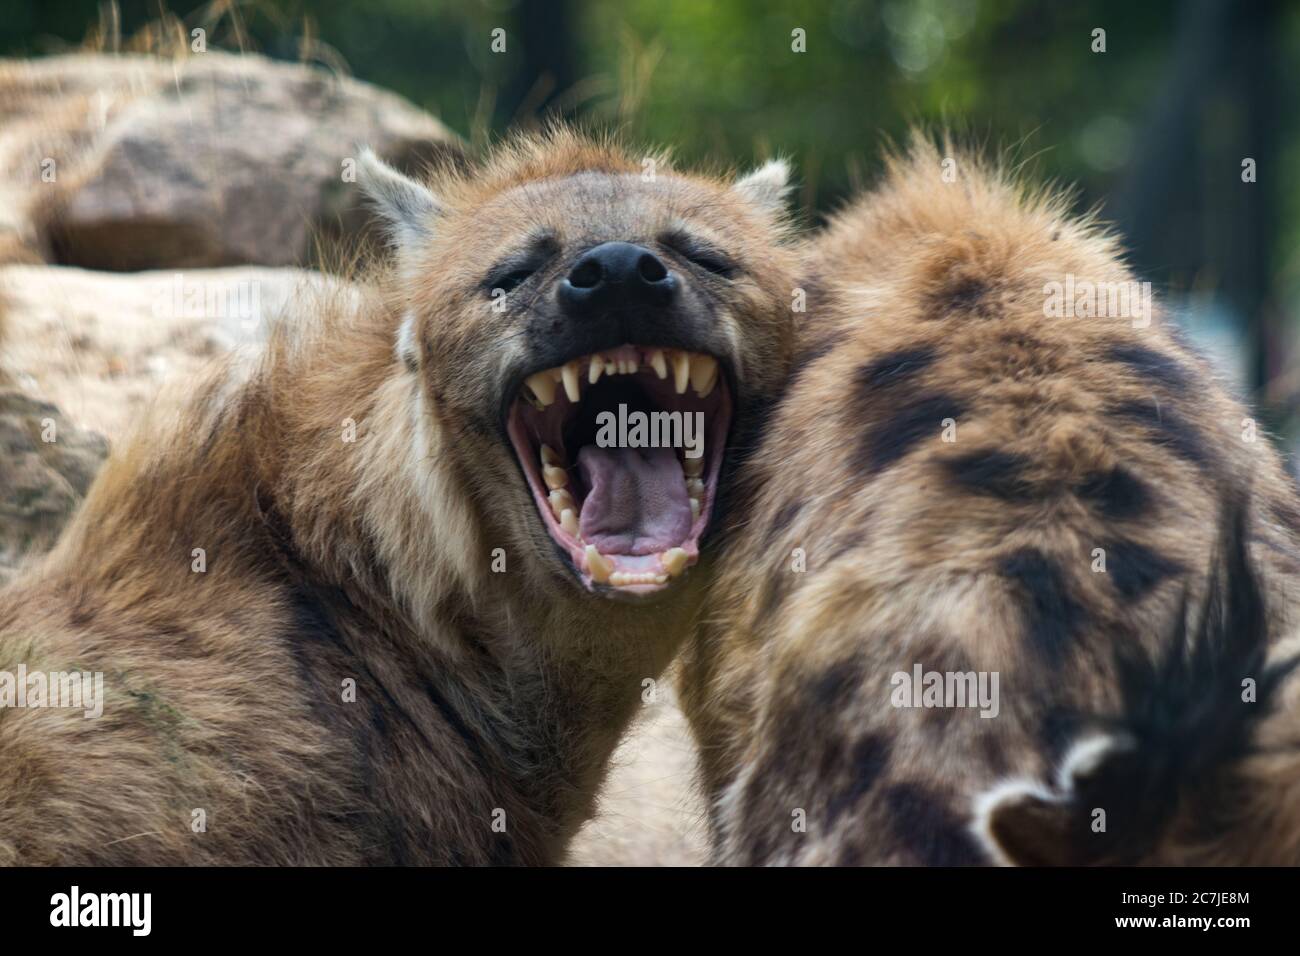 Hyenas one of them yawning with a blurred background Stock Photo